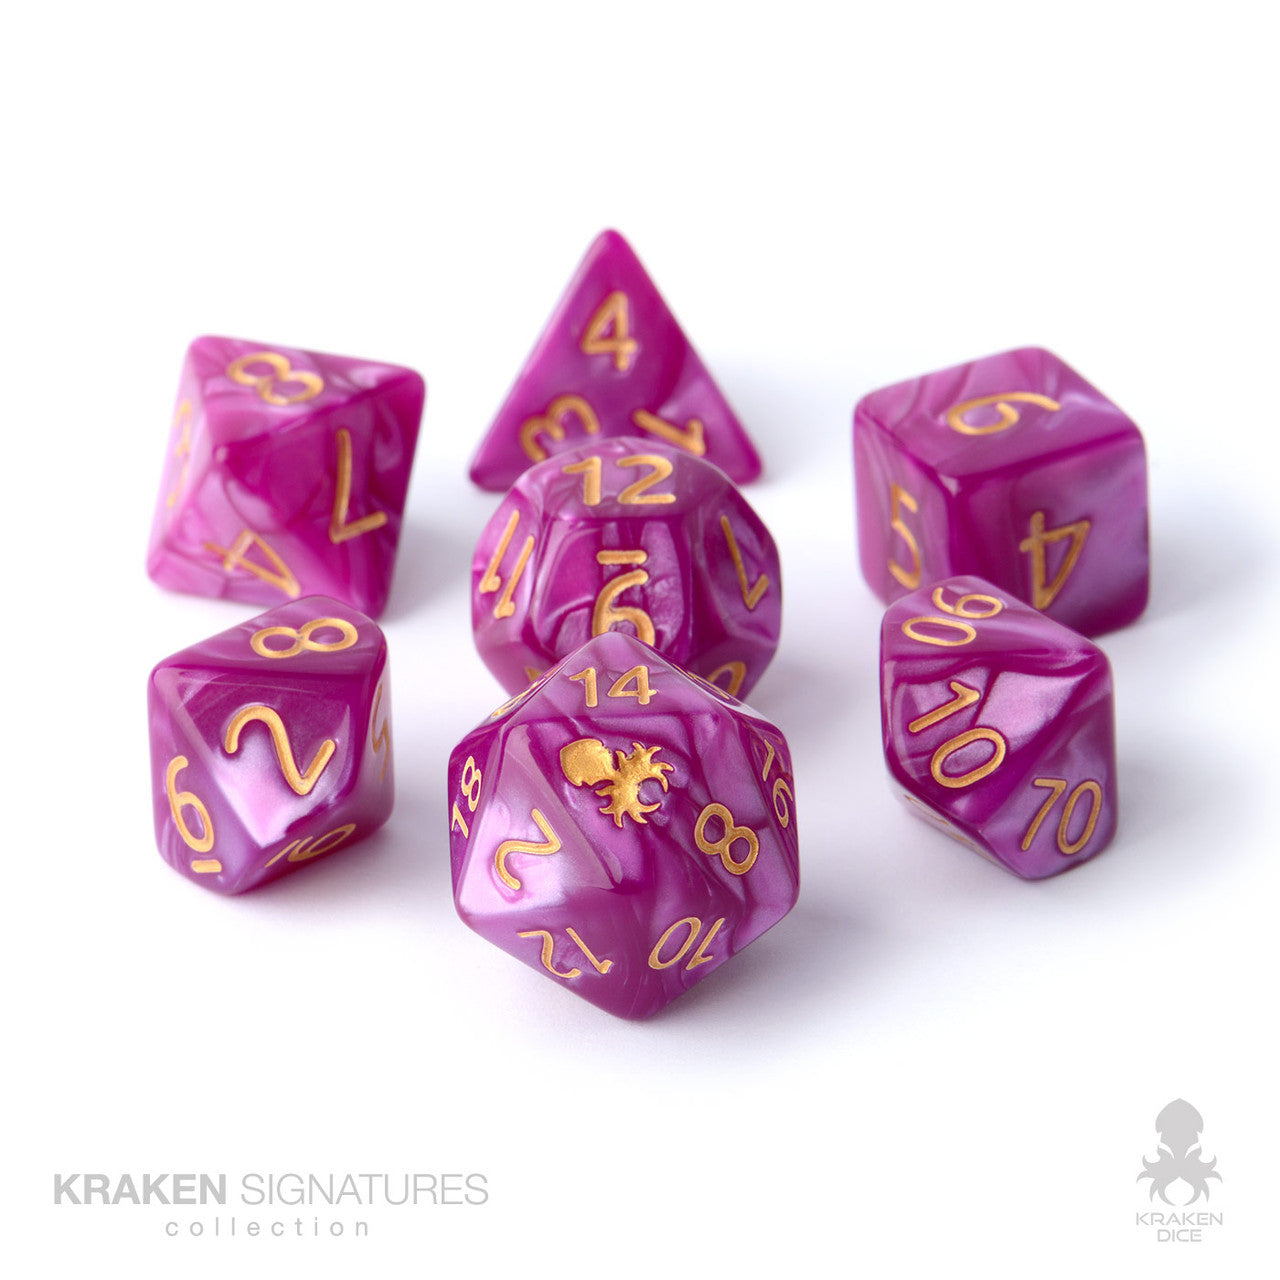 Kraken Signature's 11pc Tyrian with Gold Ink Polyhedral RPG Dice Set